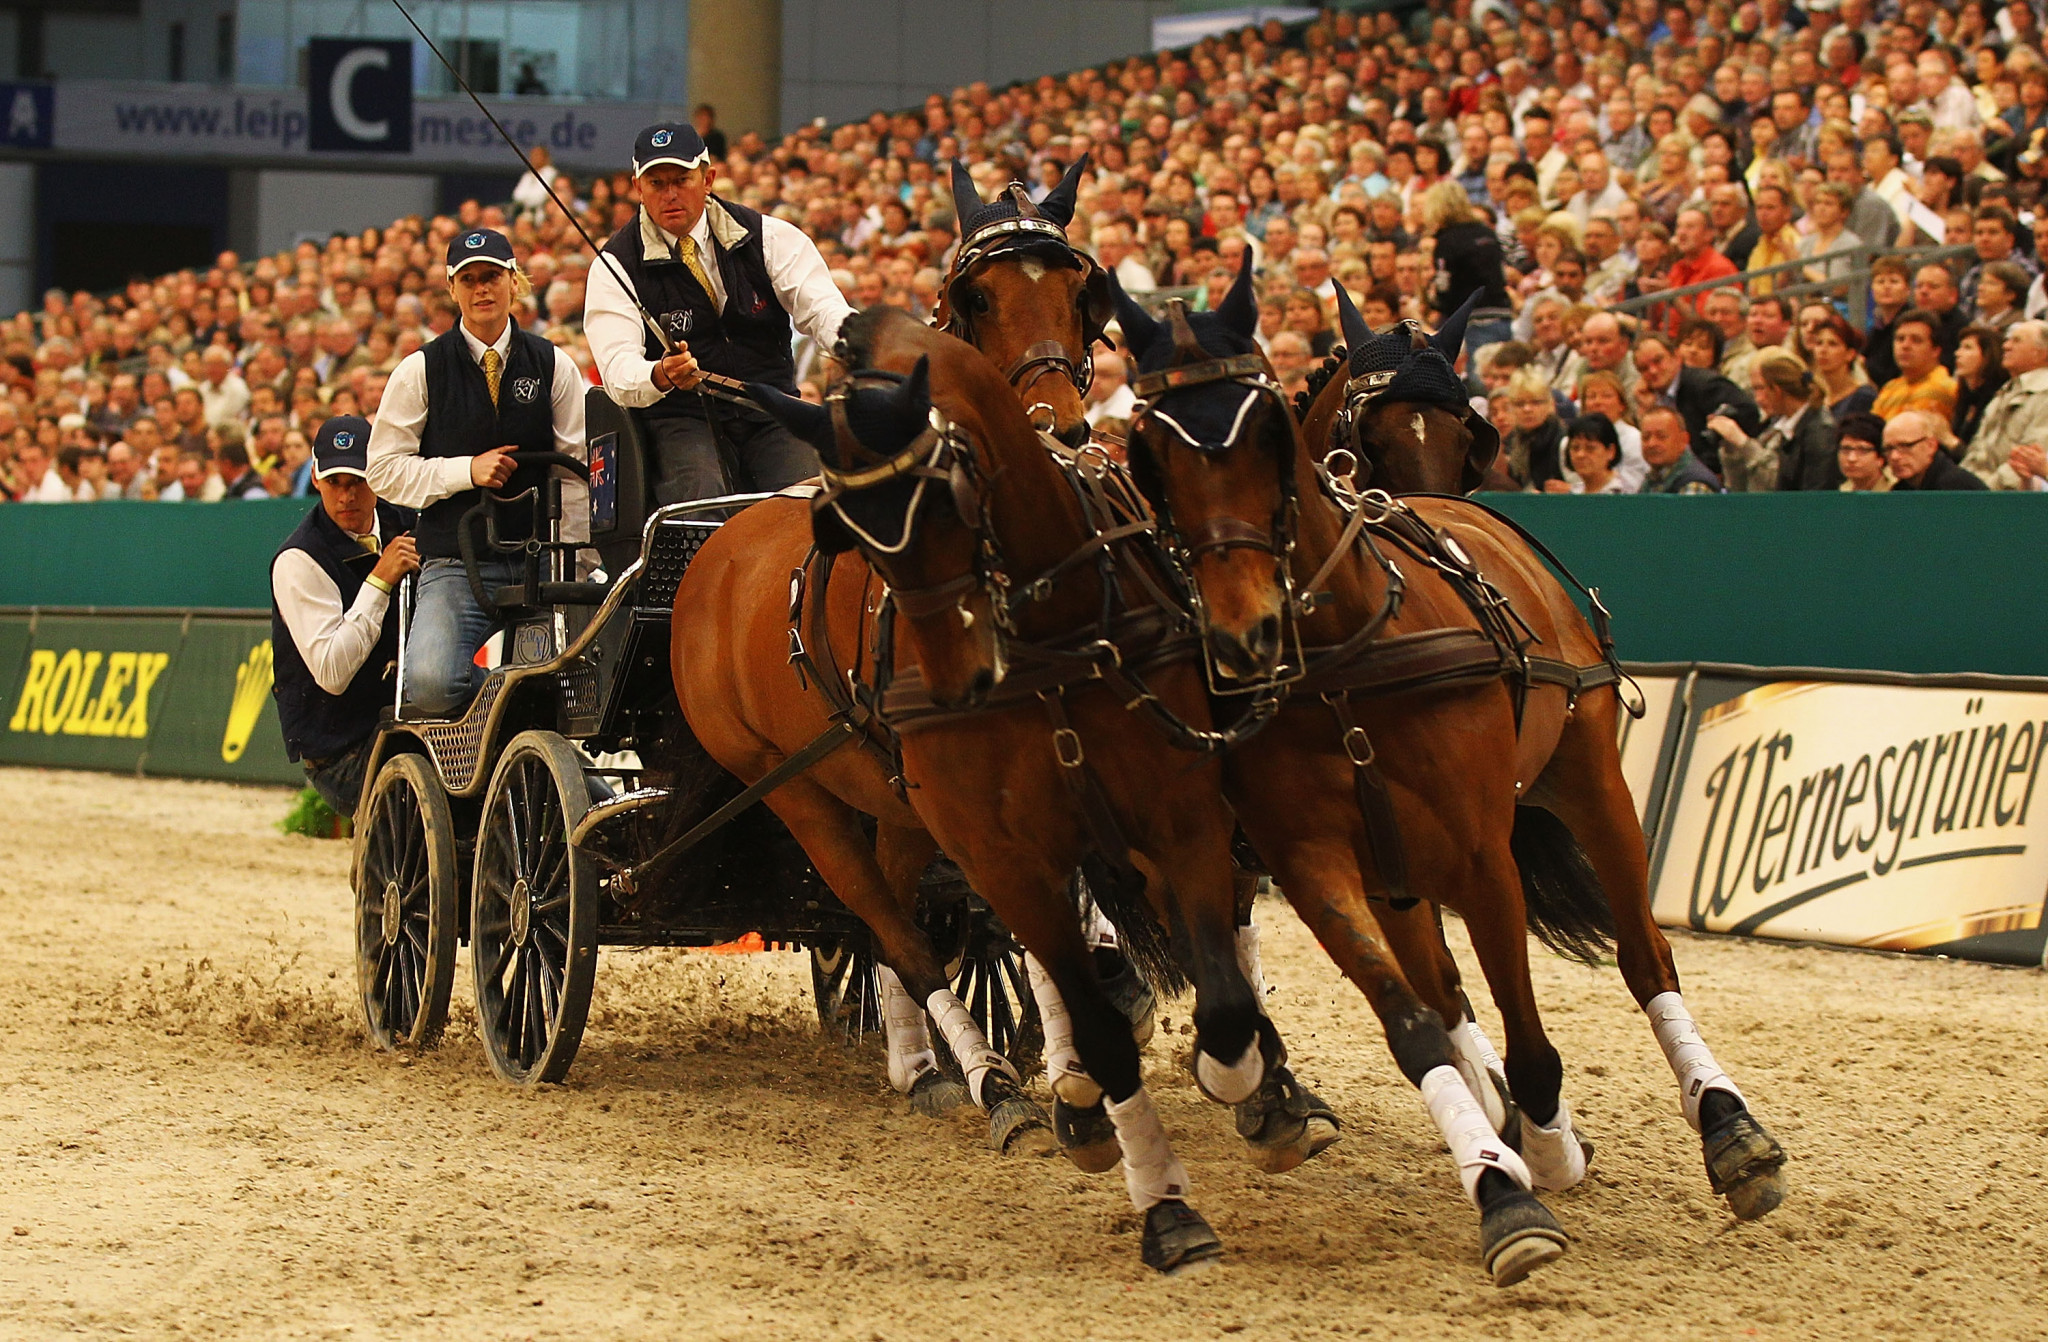 Boyd Exell was due to defend his individual title at the FEI World Driving Championships in the Netherlands, before the event's cancellation ©Getty Images